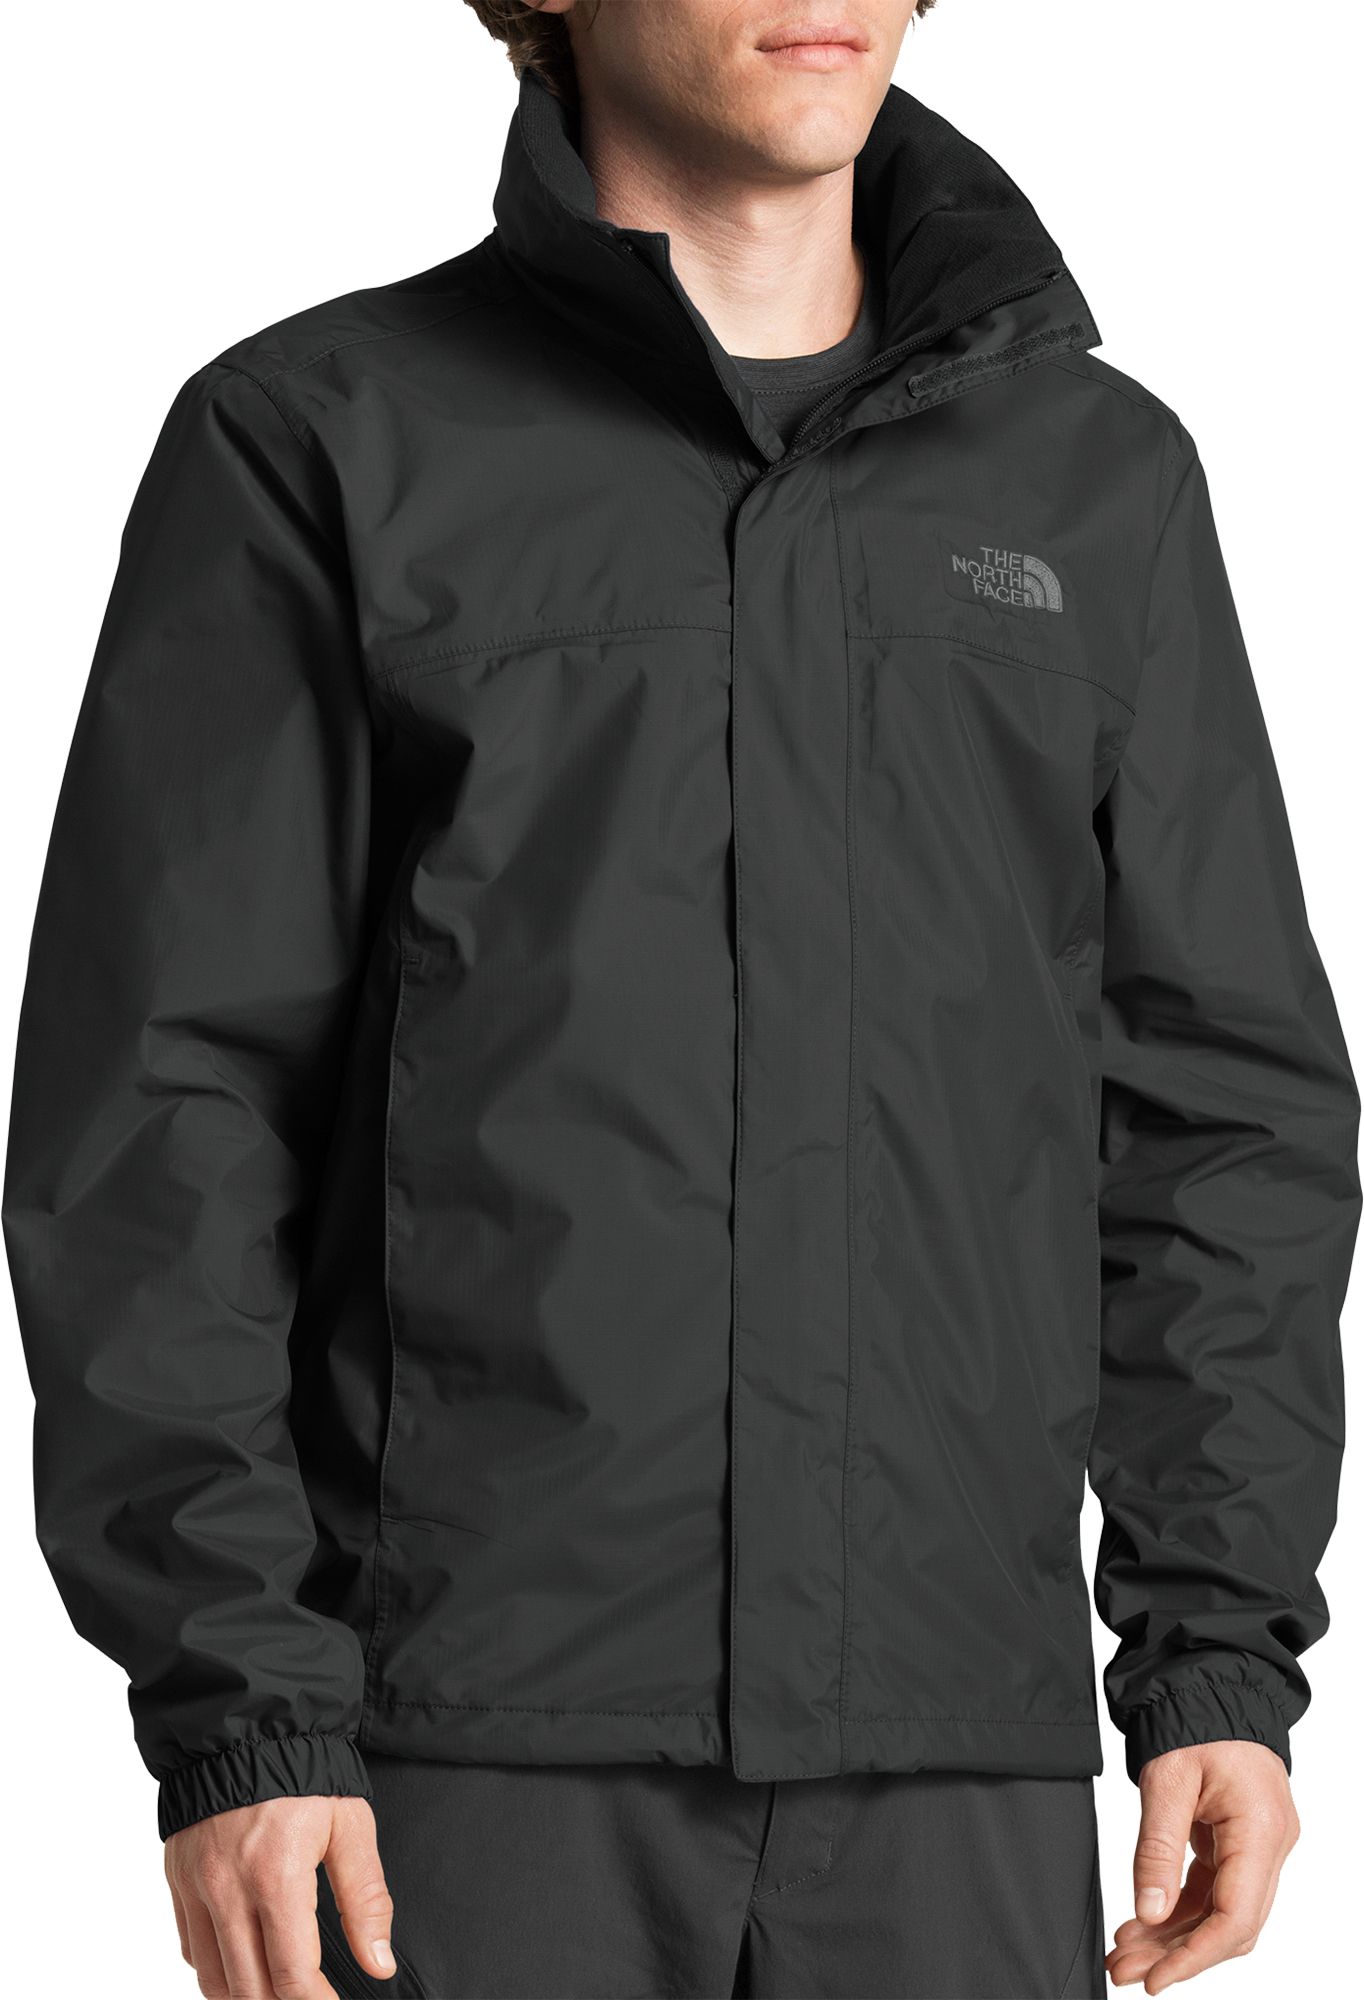 the north face resolve jacket mens